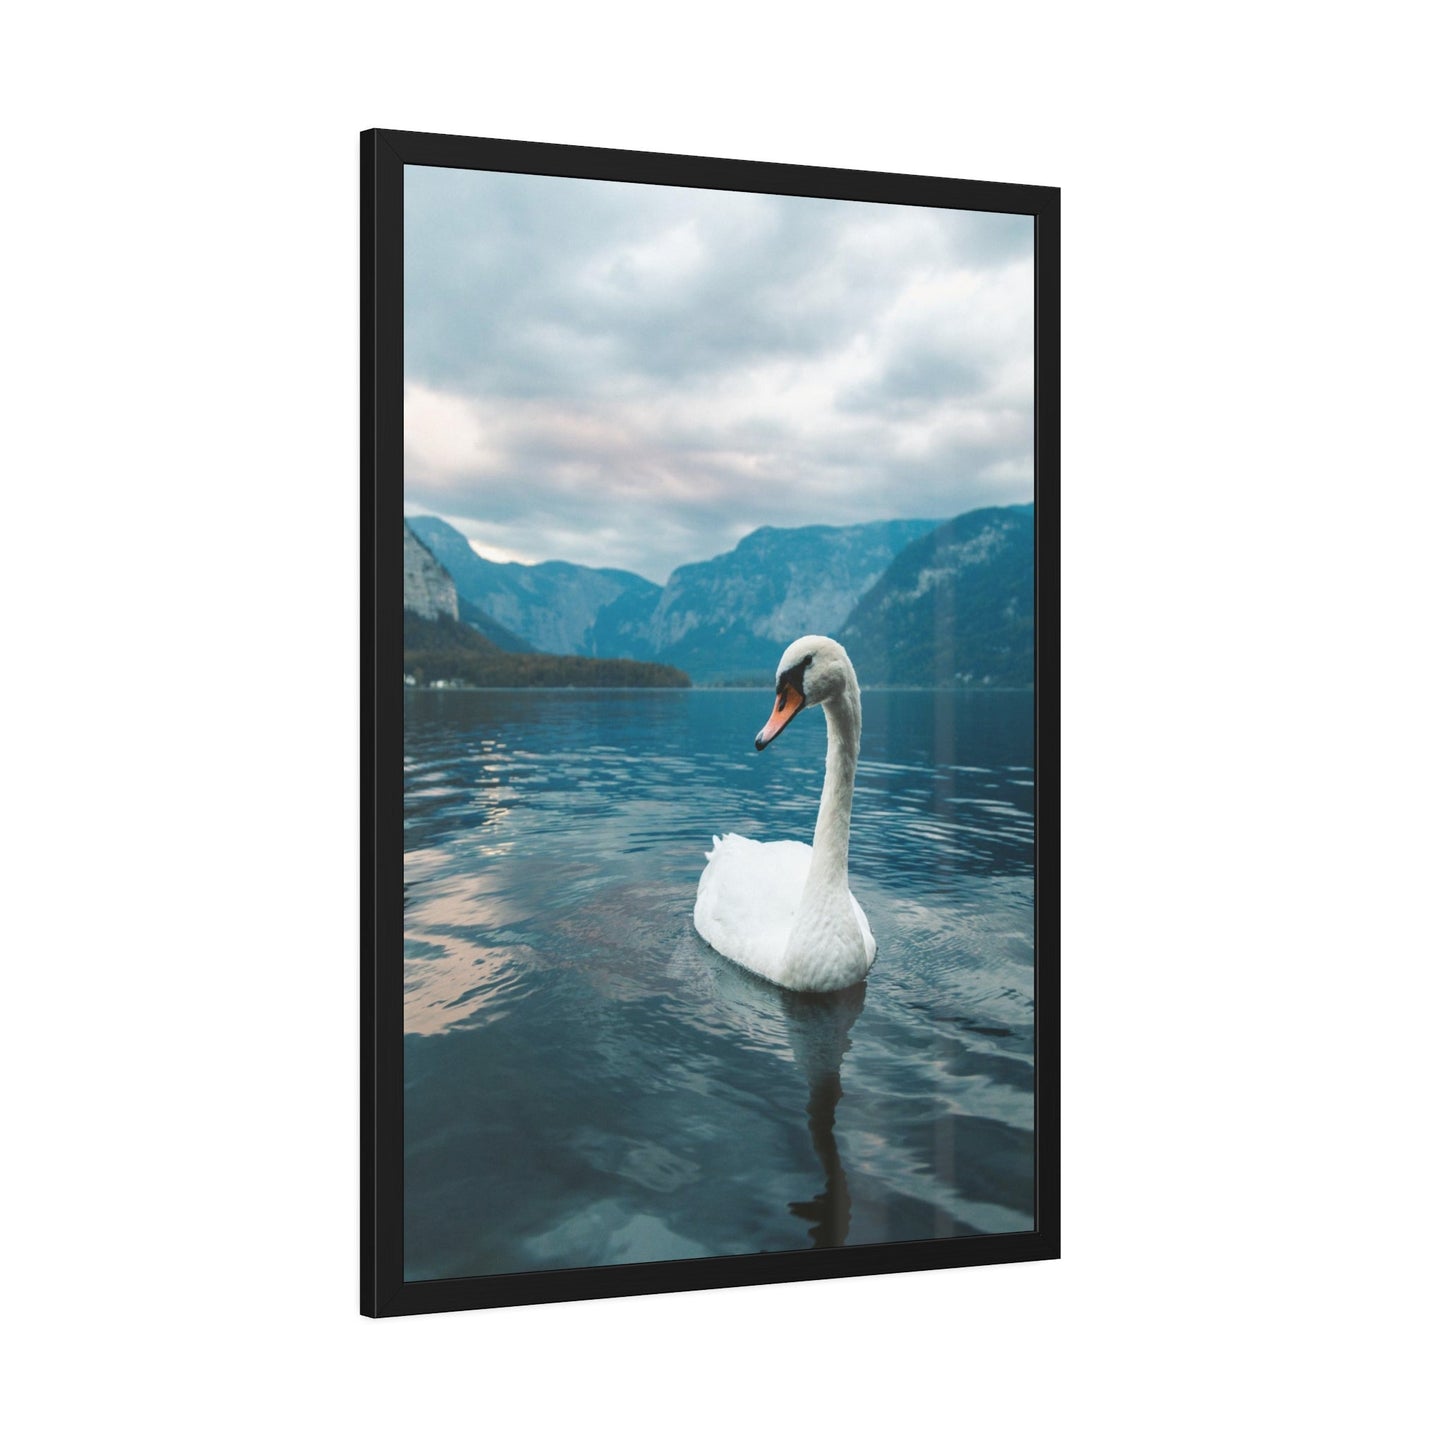 Elegance on the Water: Framed Poster and Print on Canvas Celebrating the Grace of Swan